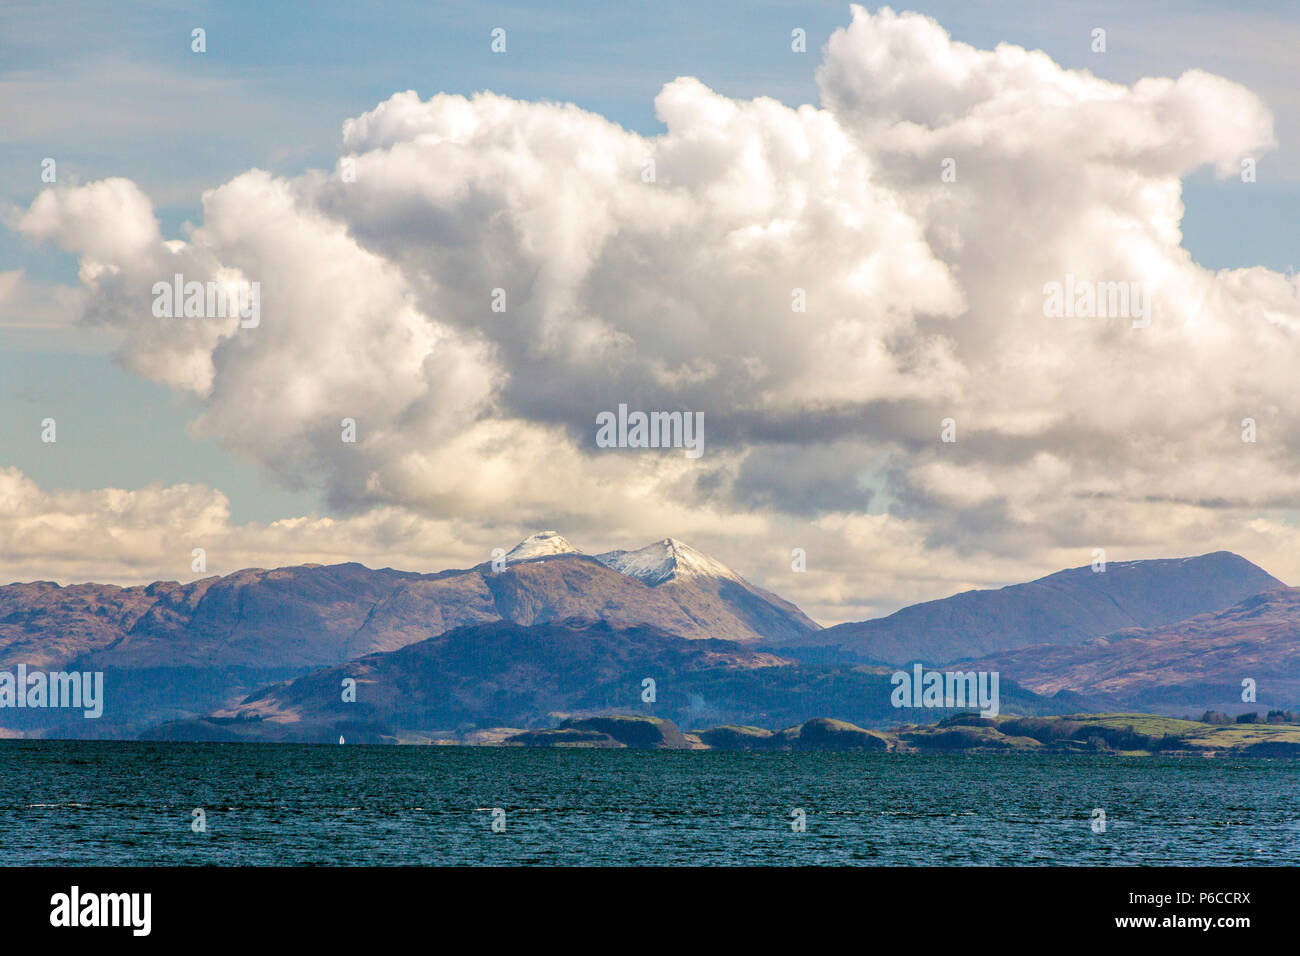 Snow on the summits of Sgorr Dhearg and Sgorr Dhonuill viewed across Loch Linnhe from an Oban - Mull ferry, Argyll and Bute, Scotland, UK Stock Photo